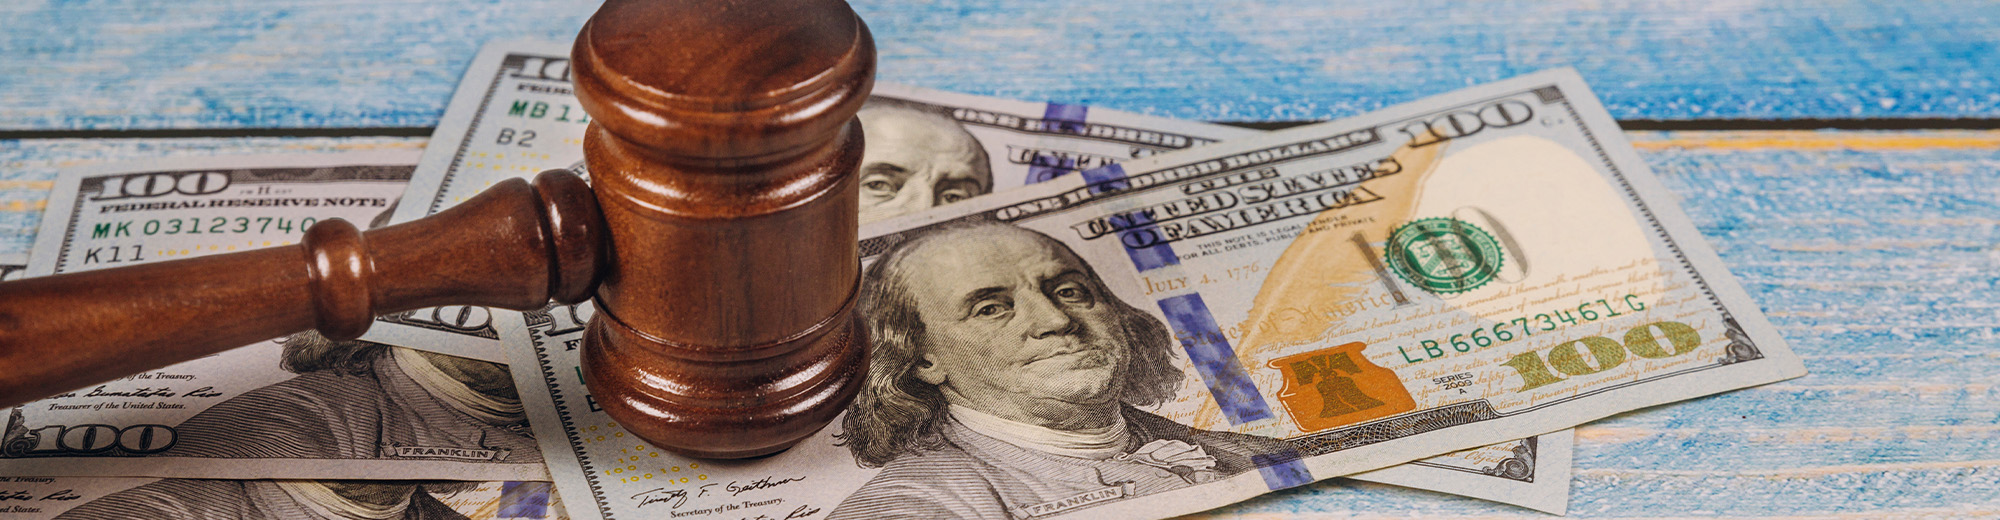 Judge gavel and money on blue wooden table